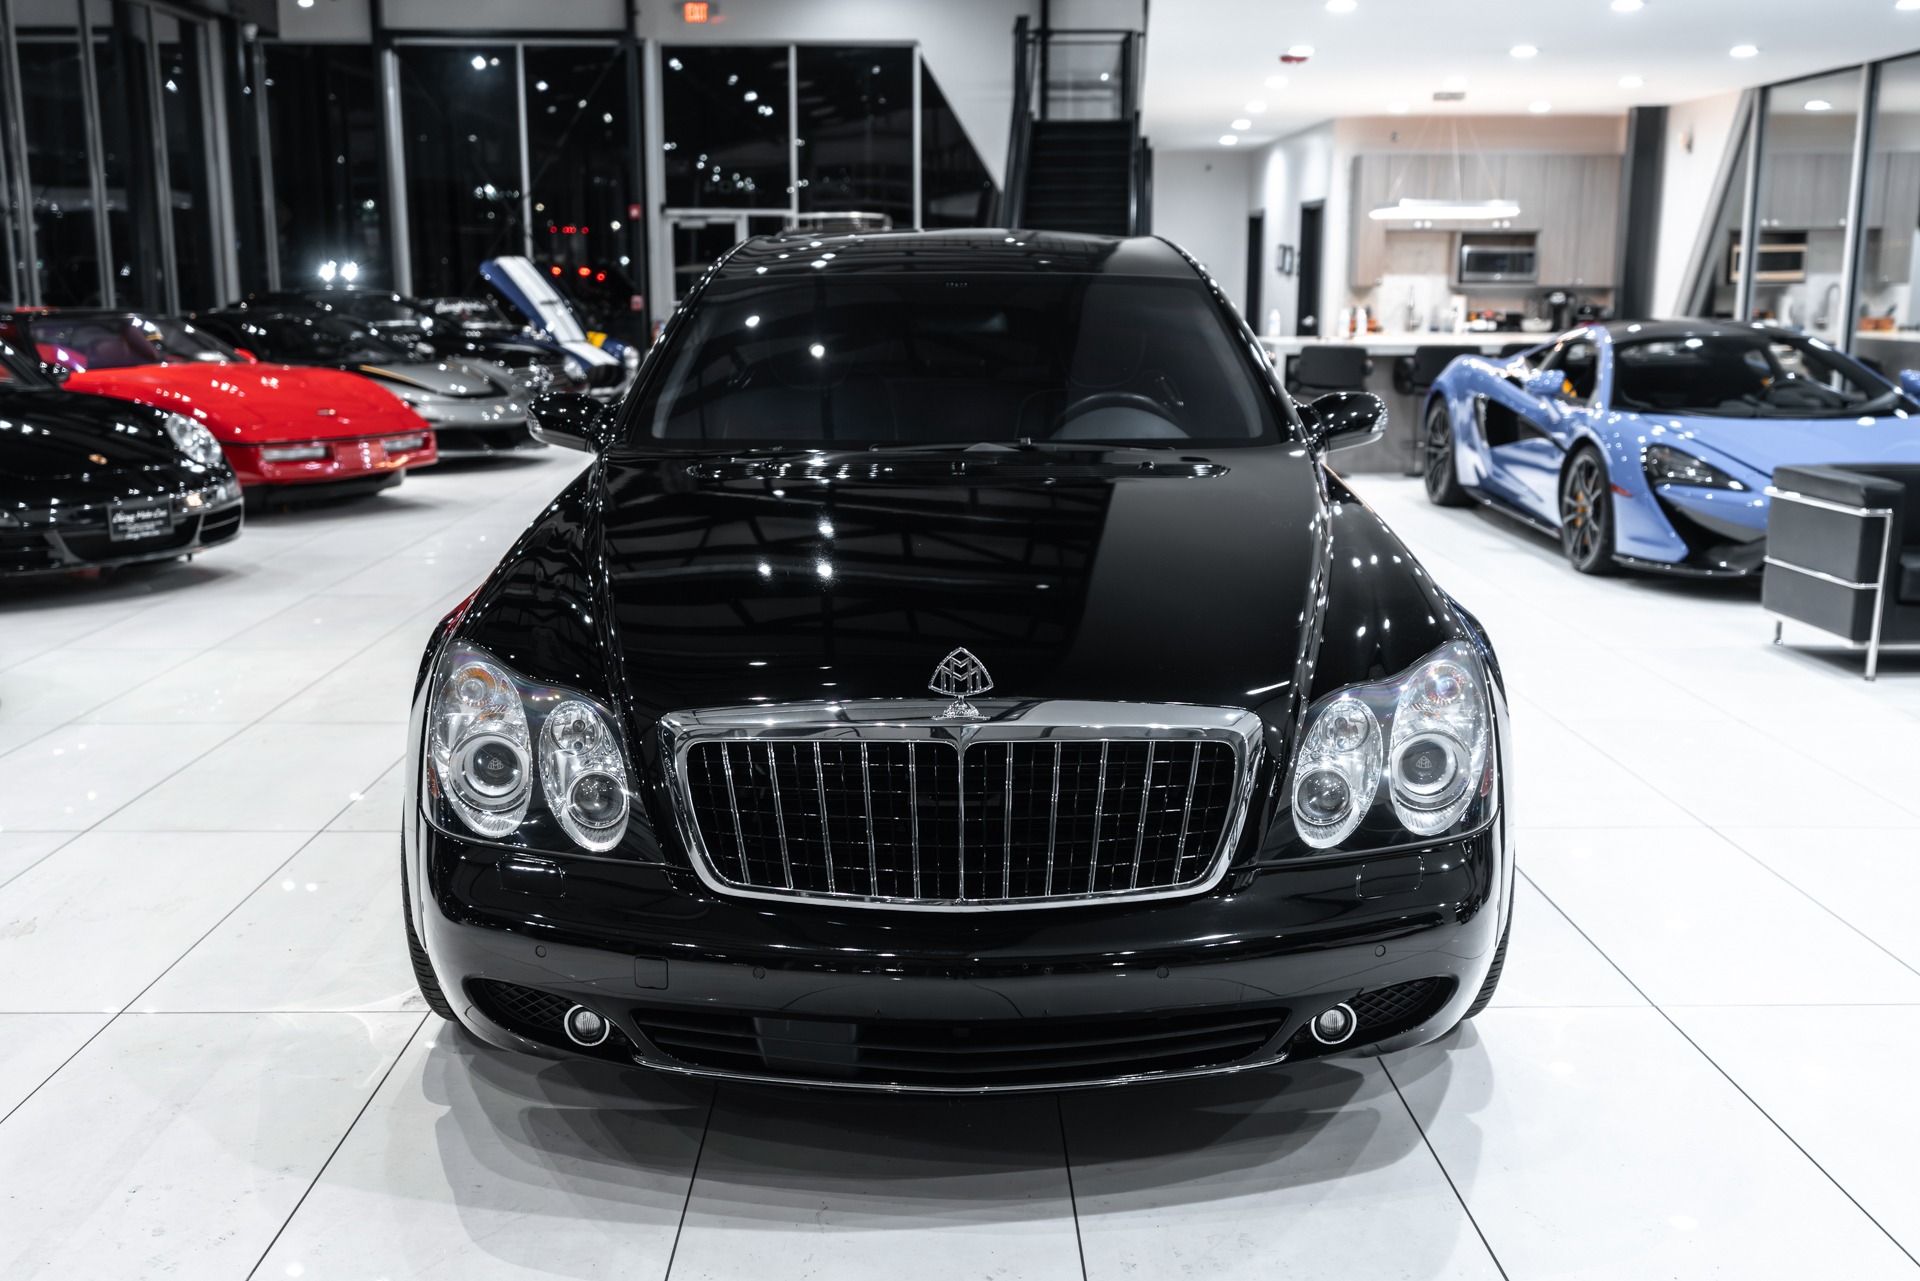 Used-2008-Maybach-62S-Sedan-Factory-Partition-RARE-Black-on-Black-Serviced-LOADED-MSRP-490k